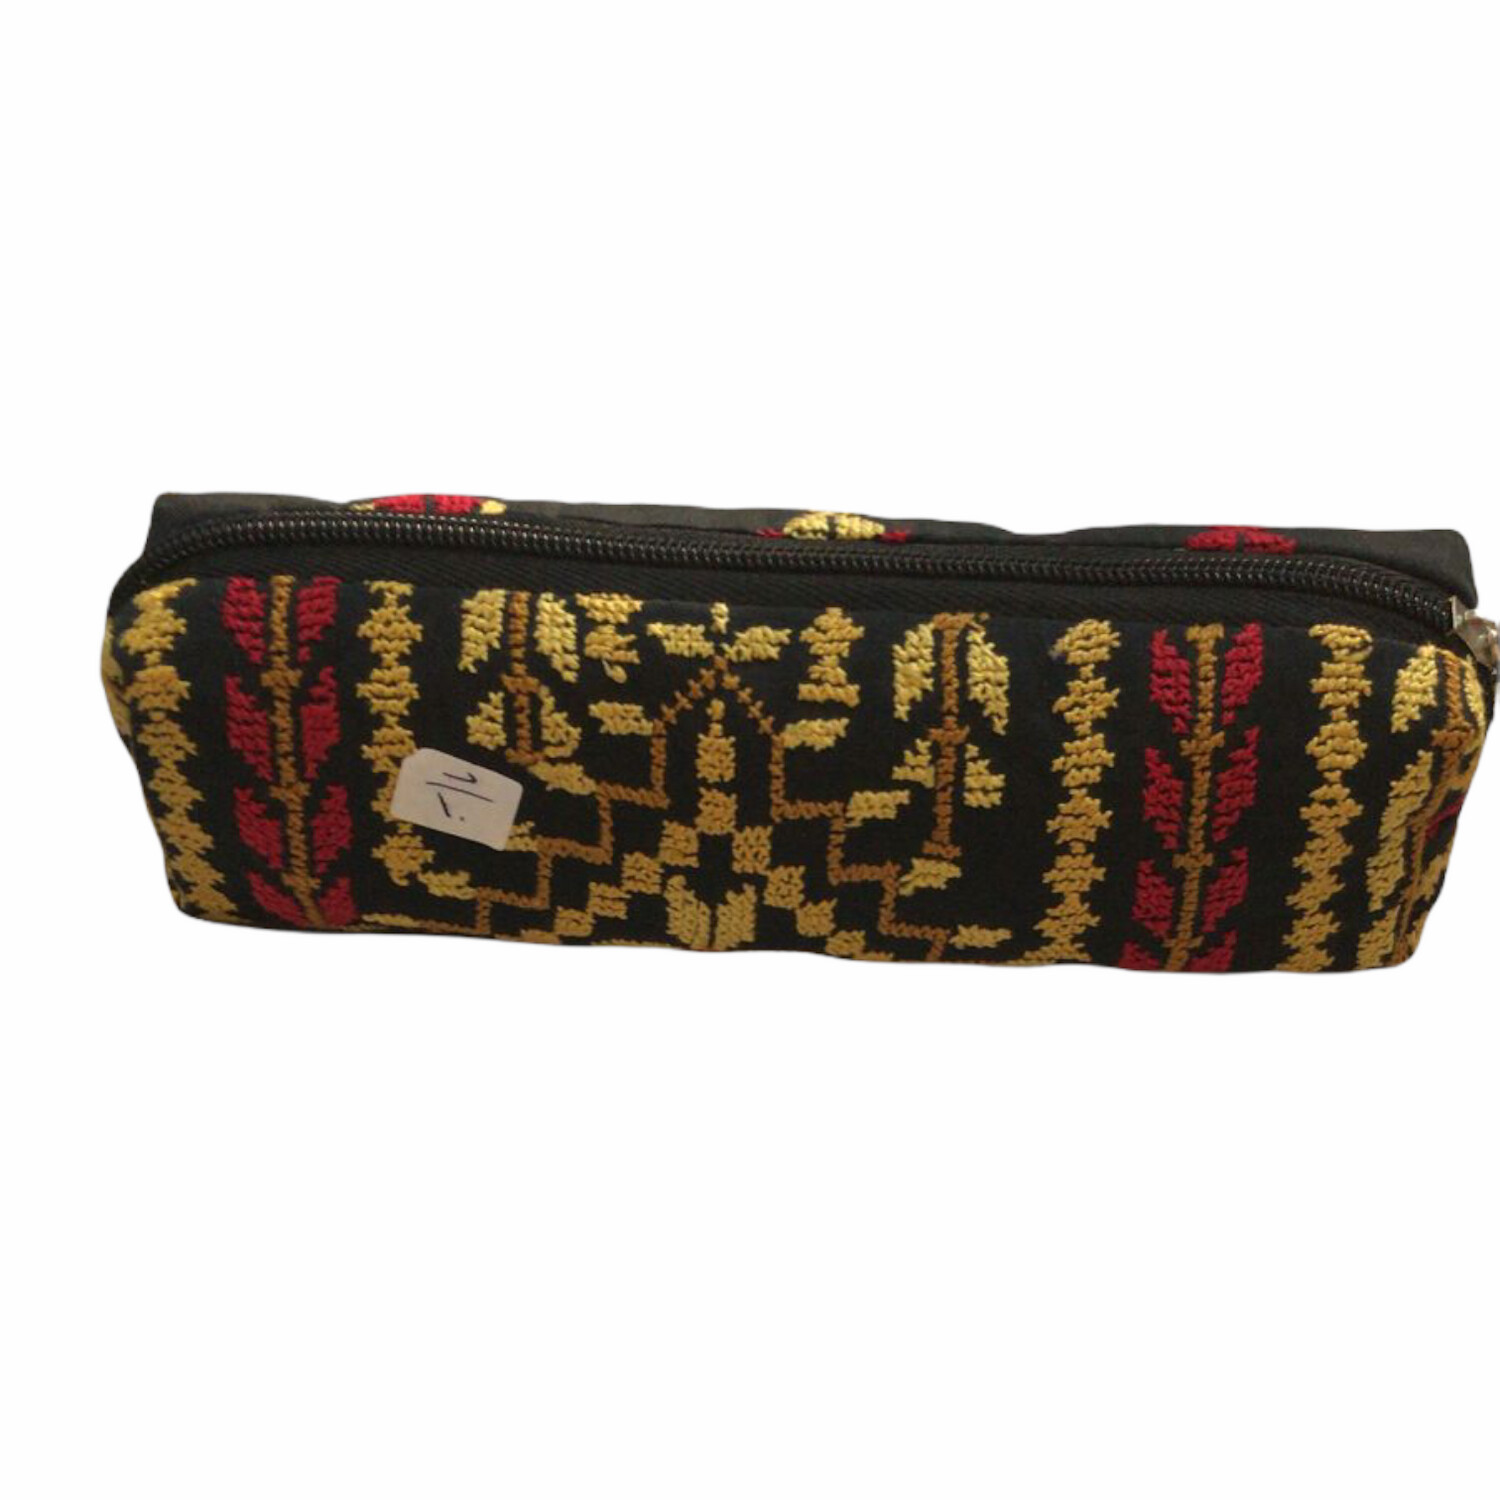 EMBROIDERED PURSE LONG MUSTARD